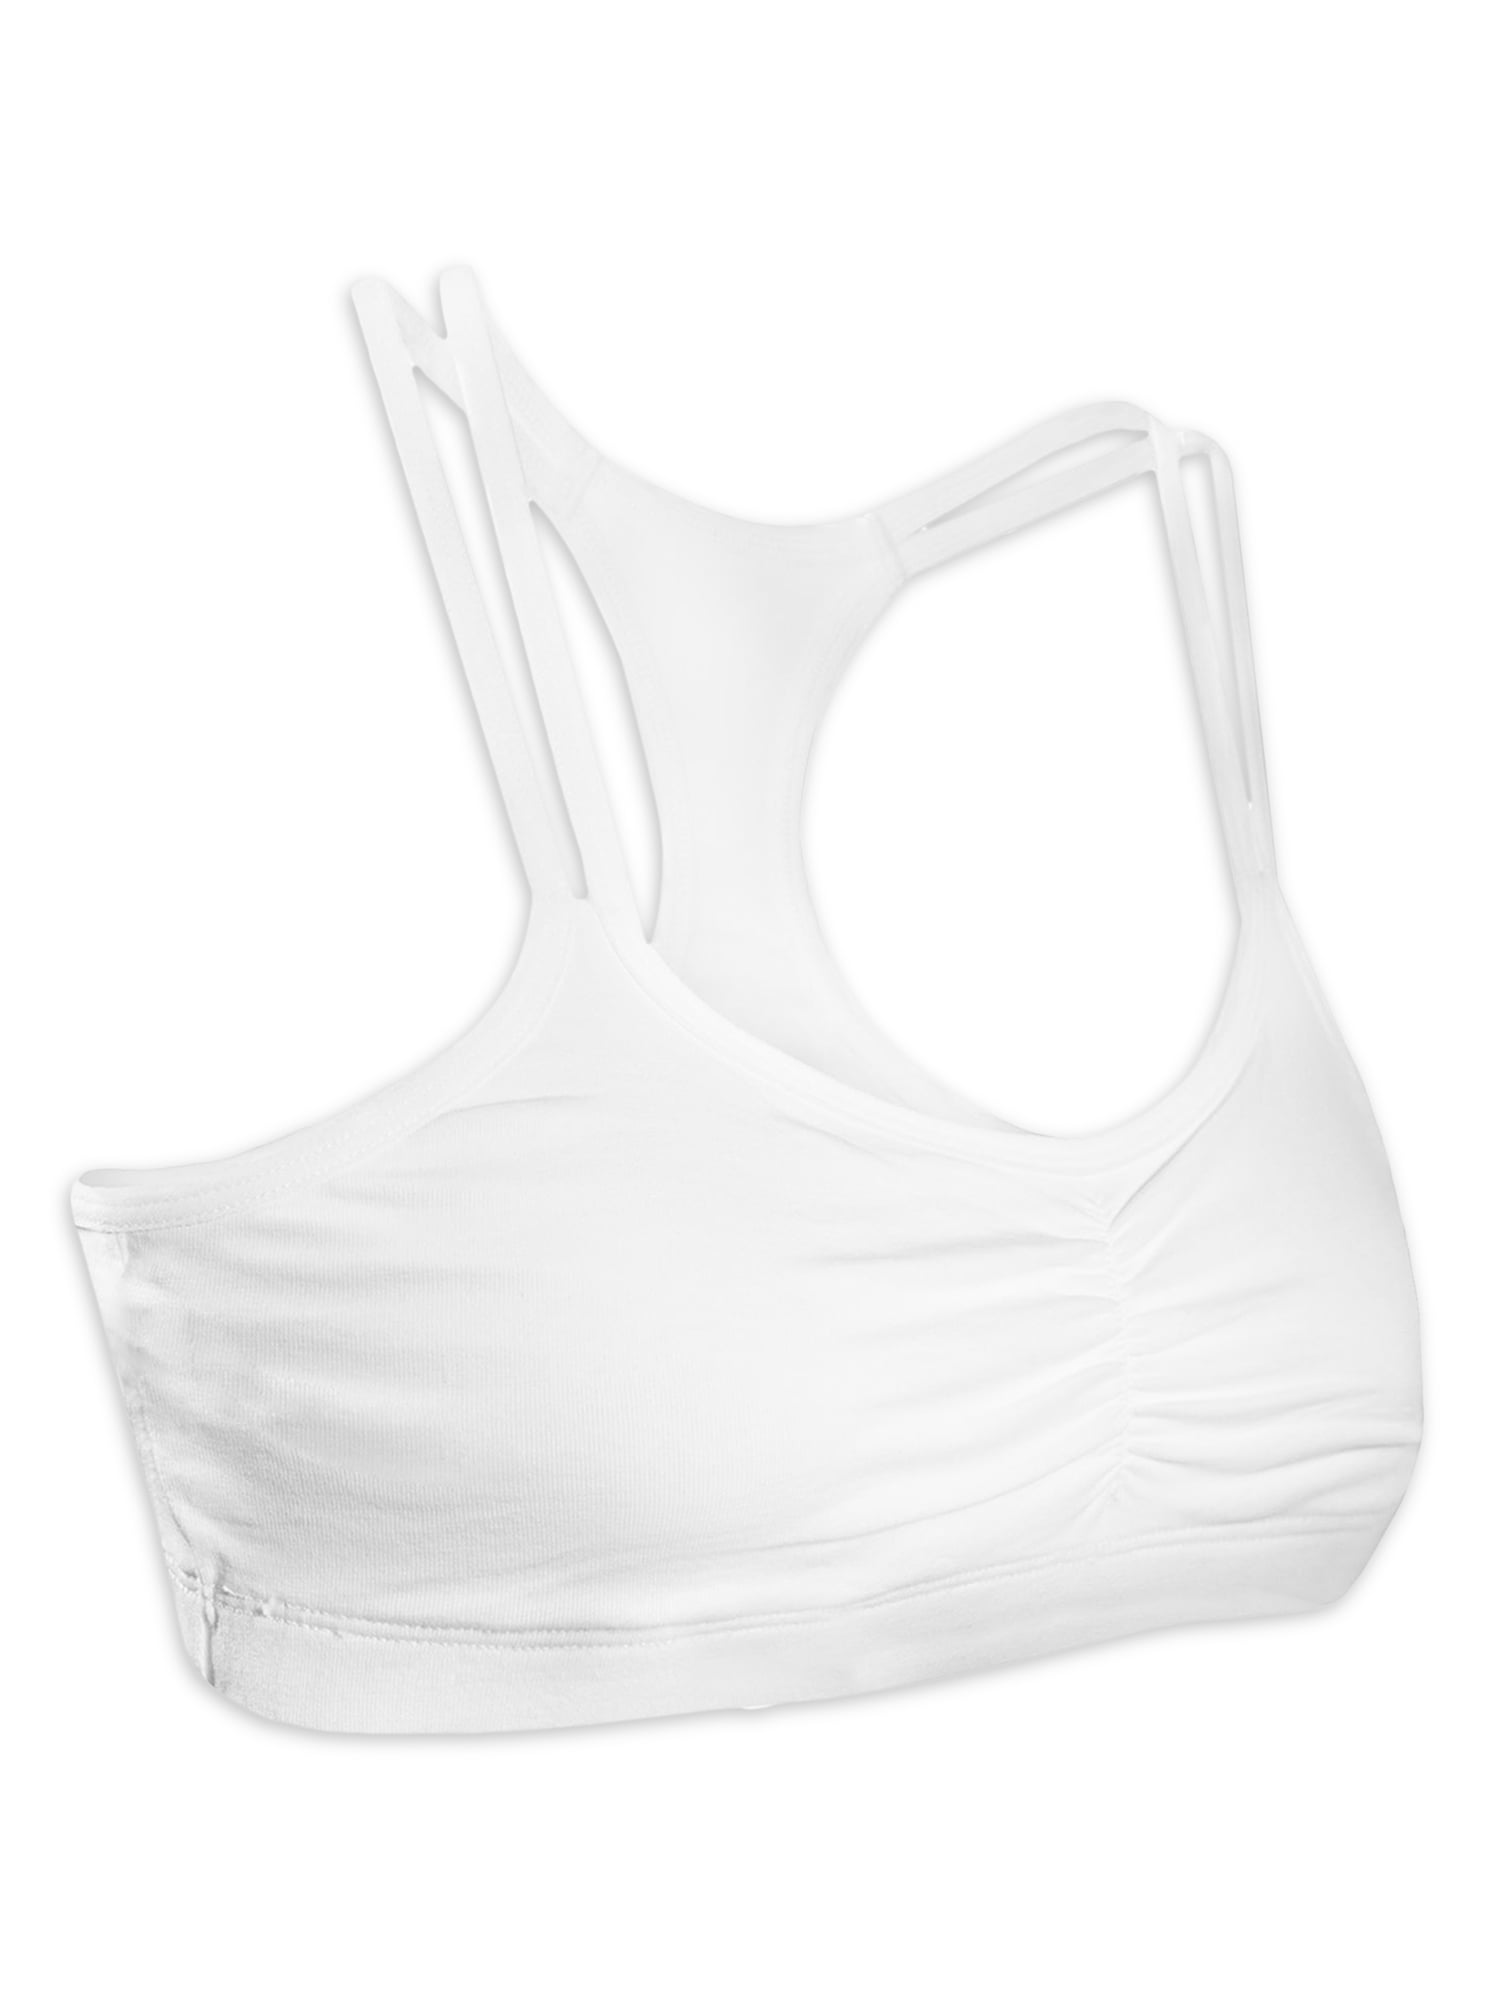 Fruit of the Loom Girls Cotton Sports Bra 3-Pack, Sizes 30-38 